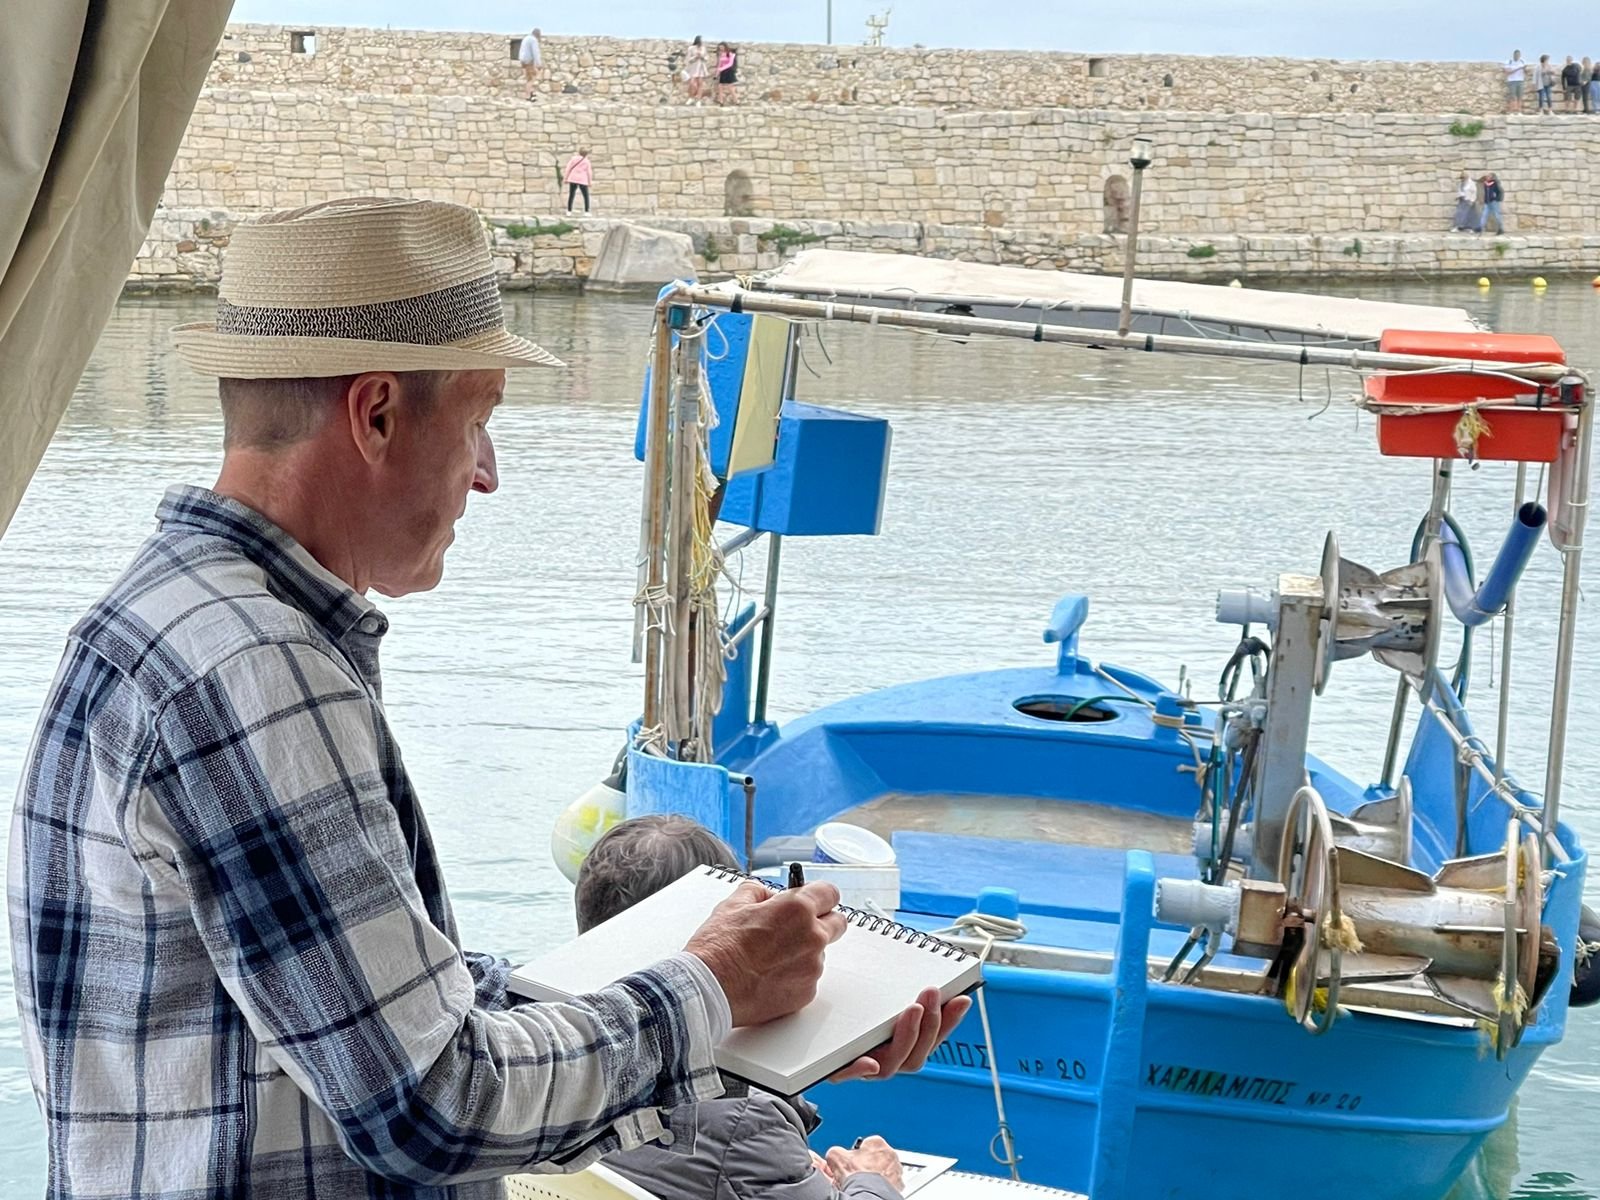 Painting the traditional boats in Rethymno, Crete